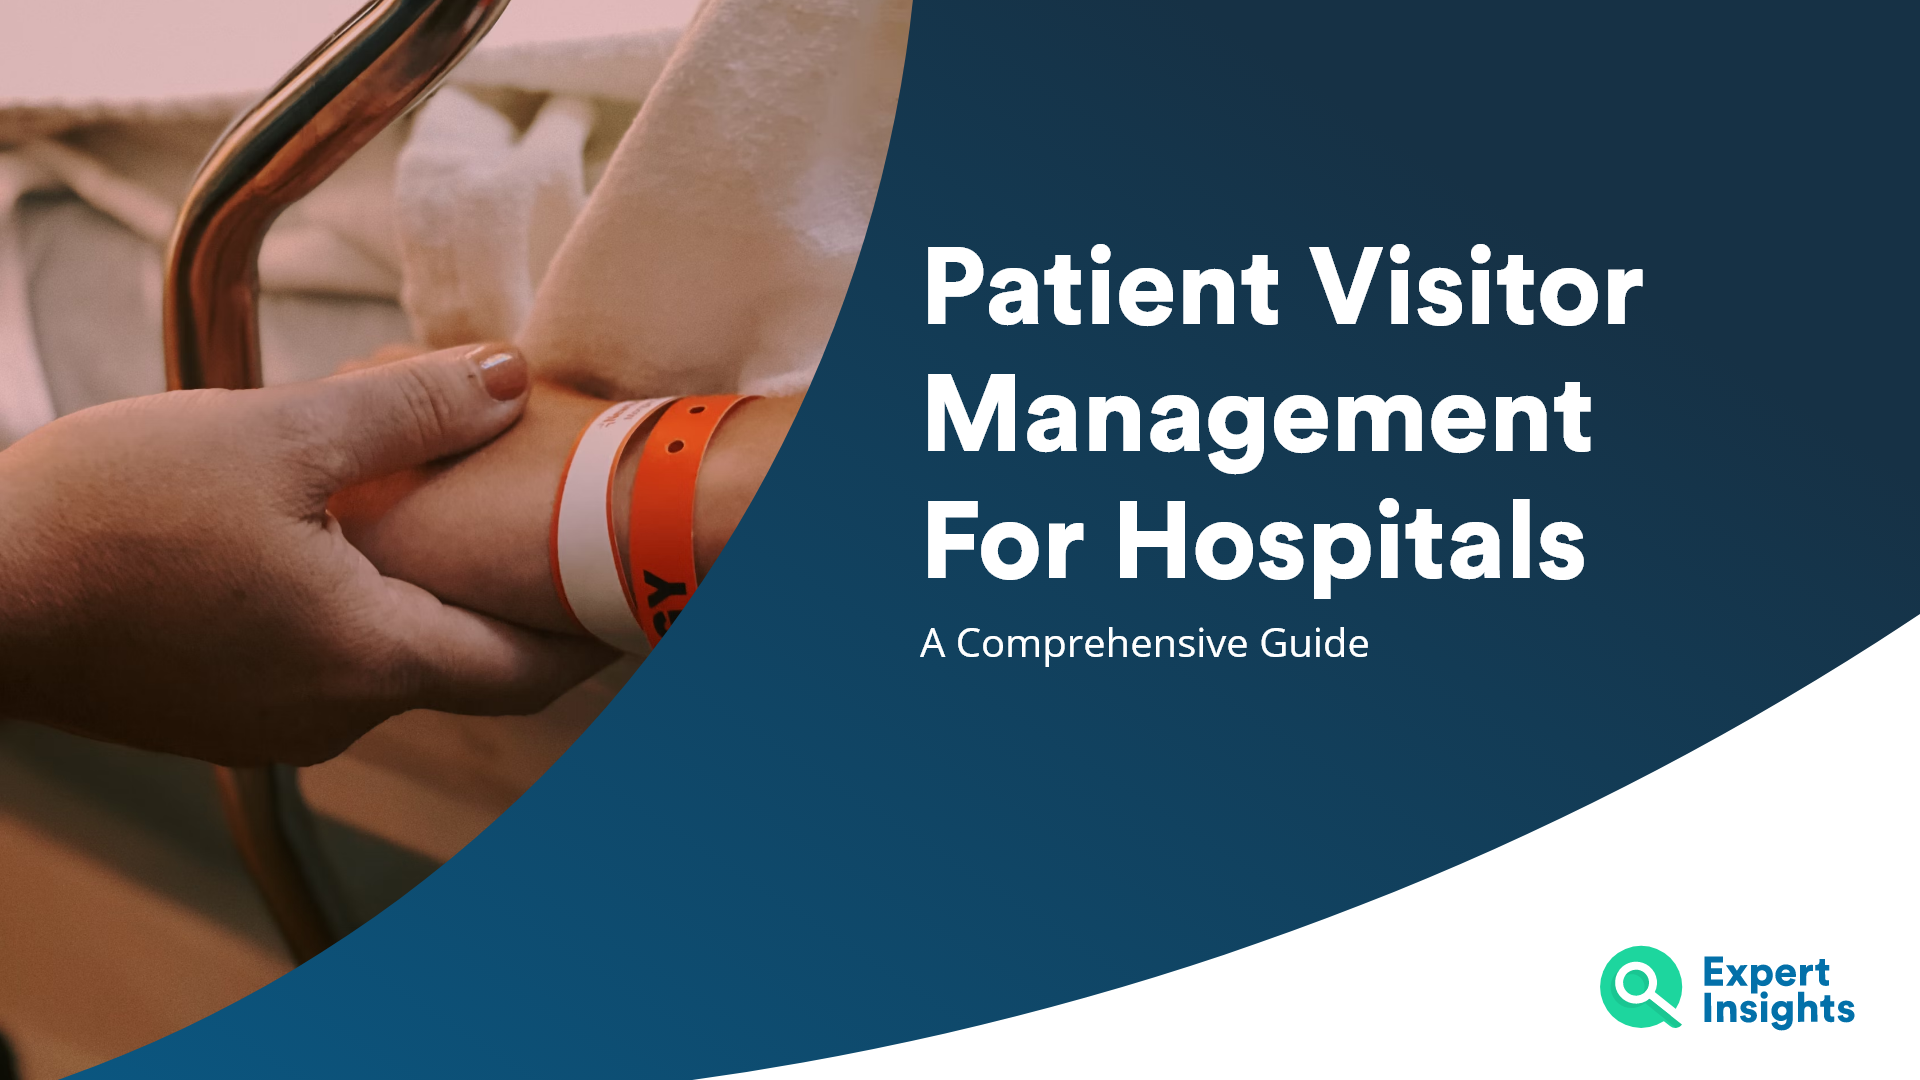 A Guide To Patient Visitor Management For Hospitals - Expert Insights